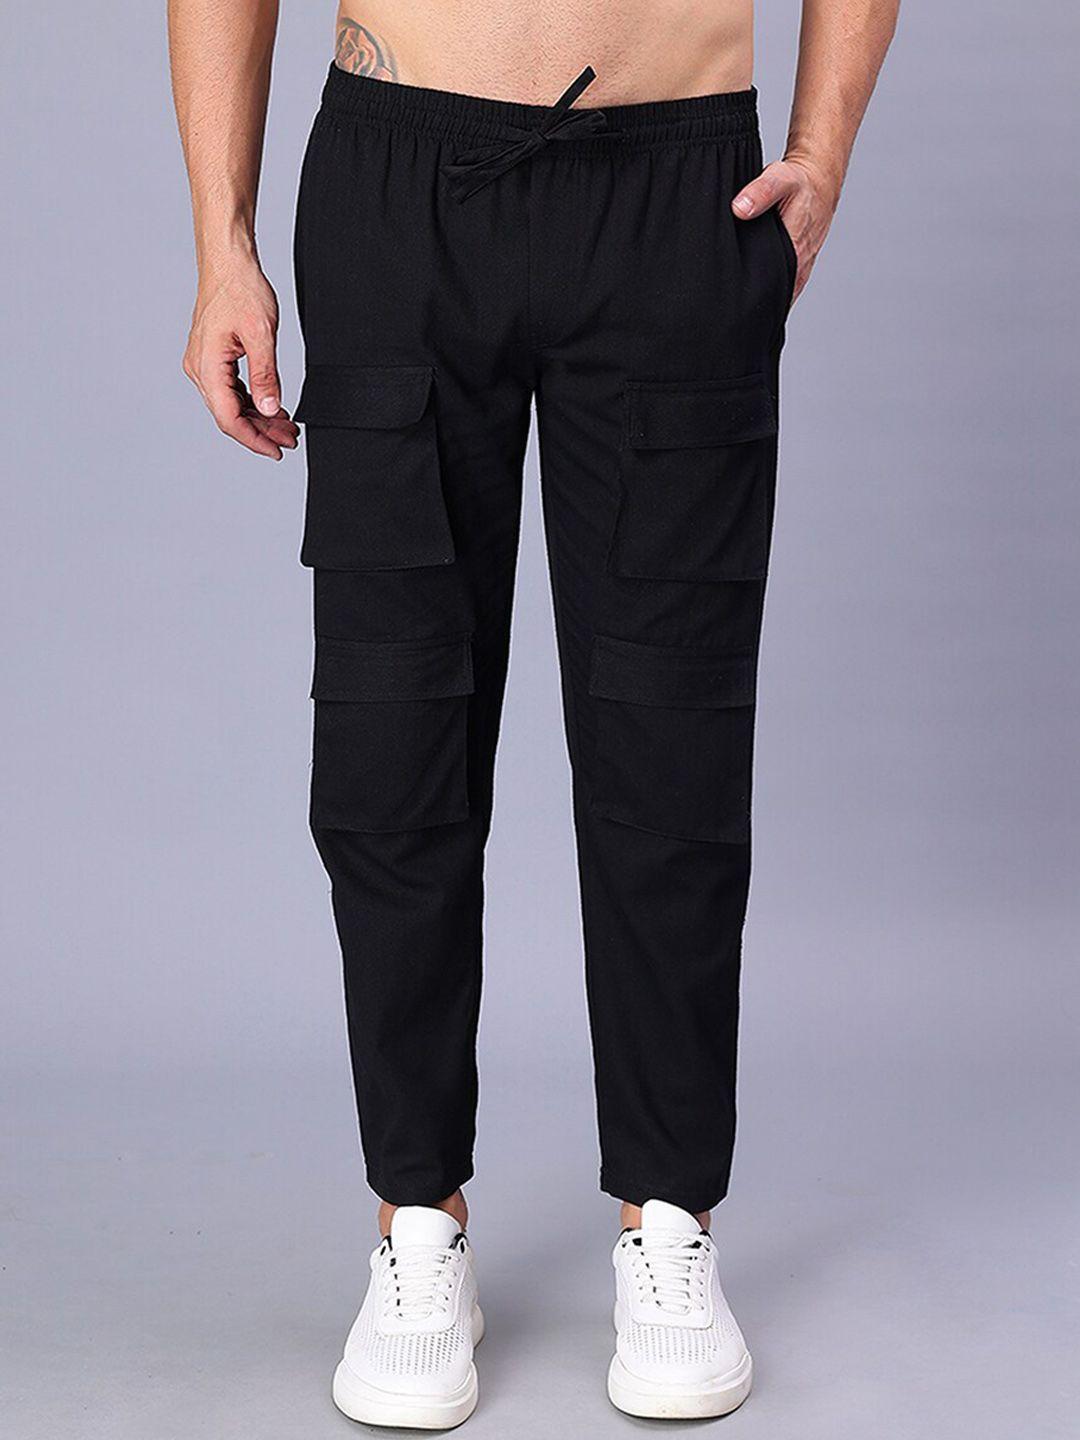 mad over print men black relaxed loose fit joggers trousers